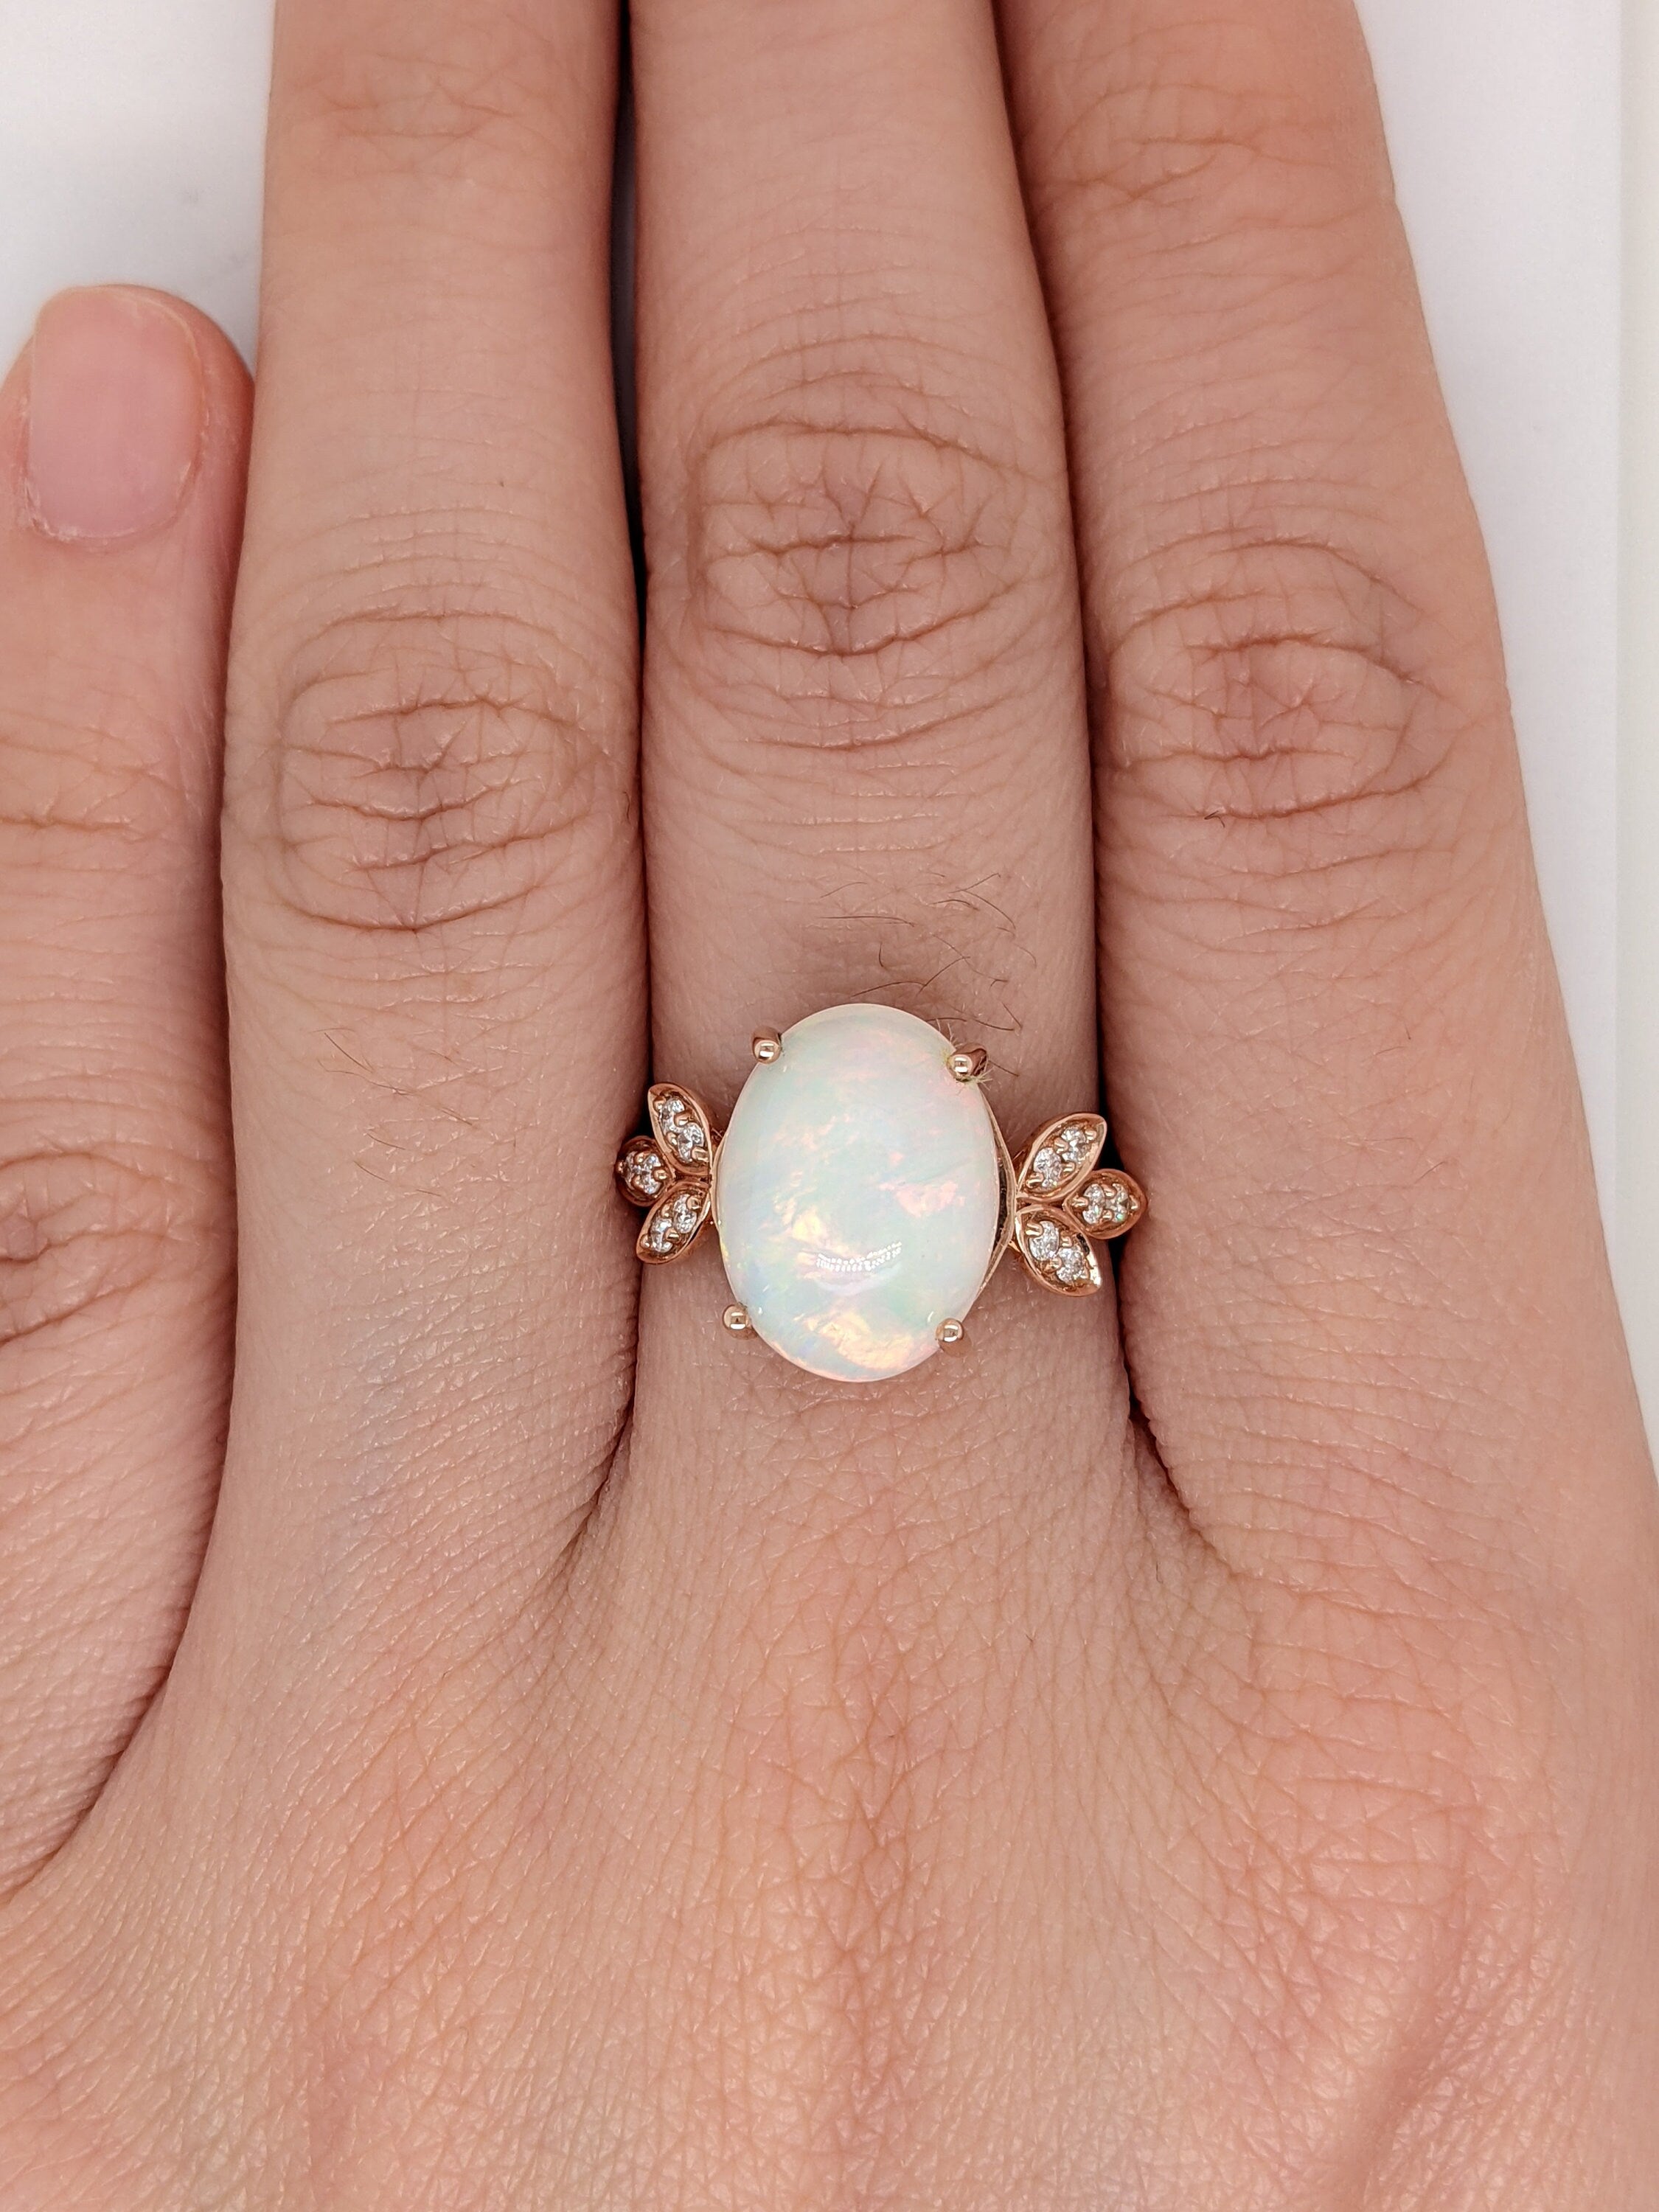 Statement Rings-Statement Ethiopian Opal Ring with Diamond Accents in Solid 14k Rose Gold | Oval 14x10mm | Gemstone Jewelry | October Birthstone | Statement - NNJGemstones